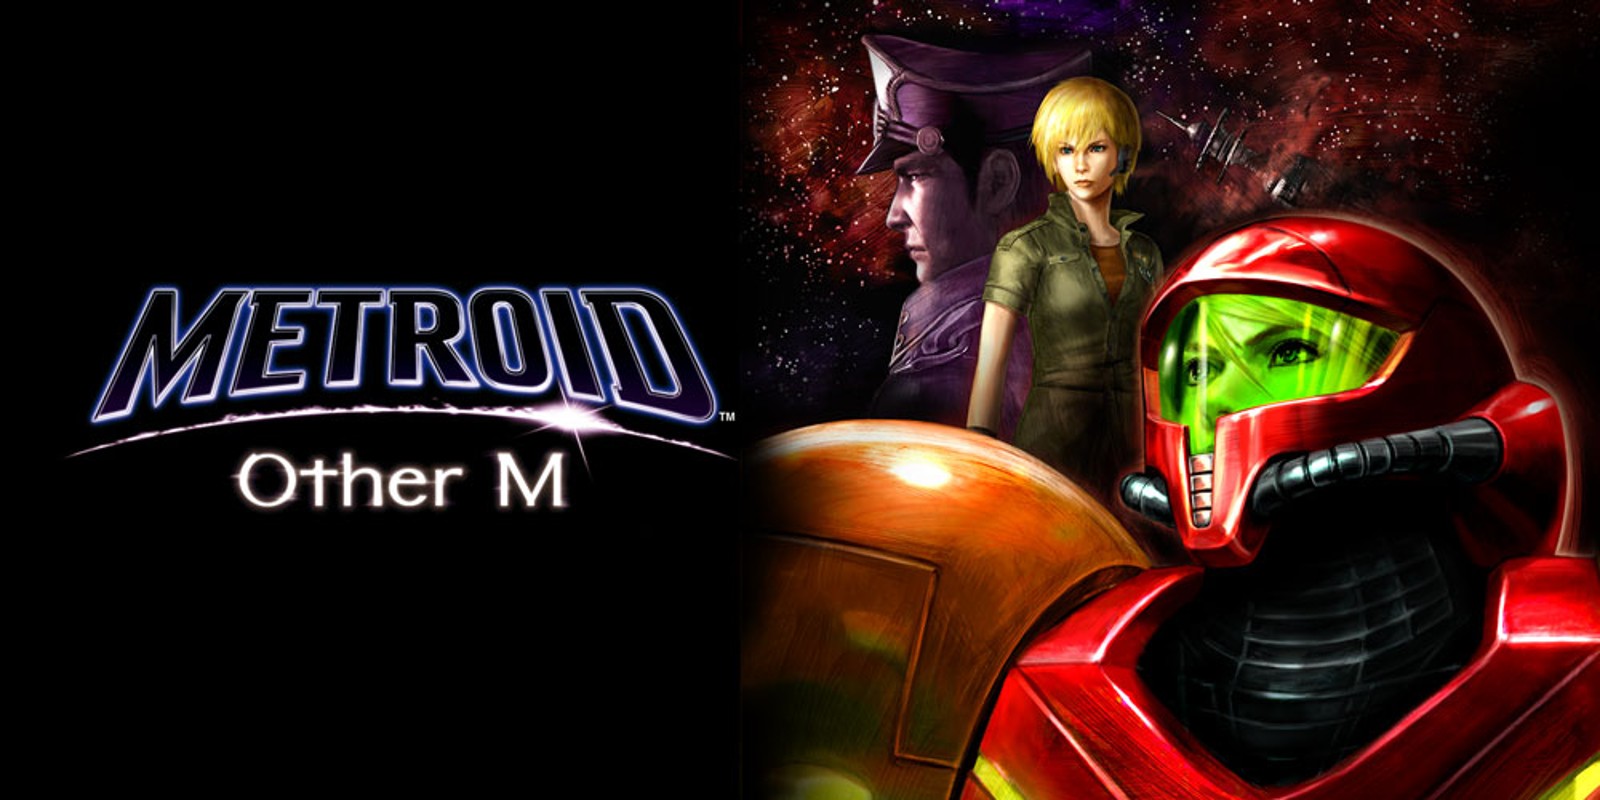 weird video game reboots - Metroid: The Other M